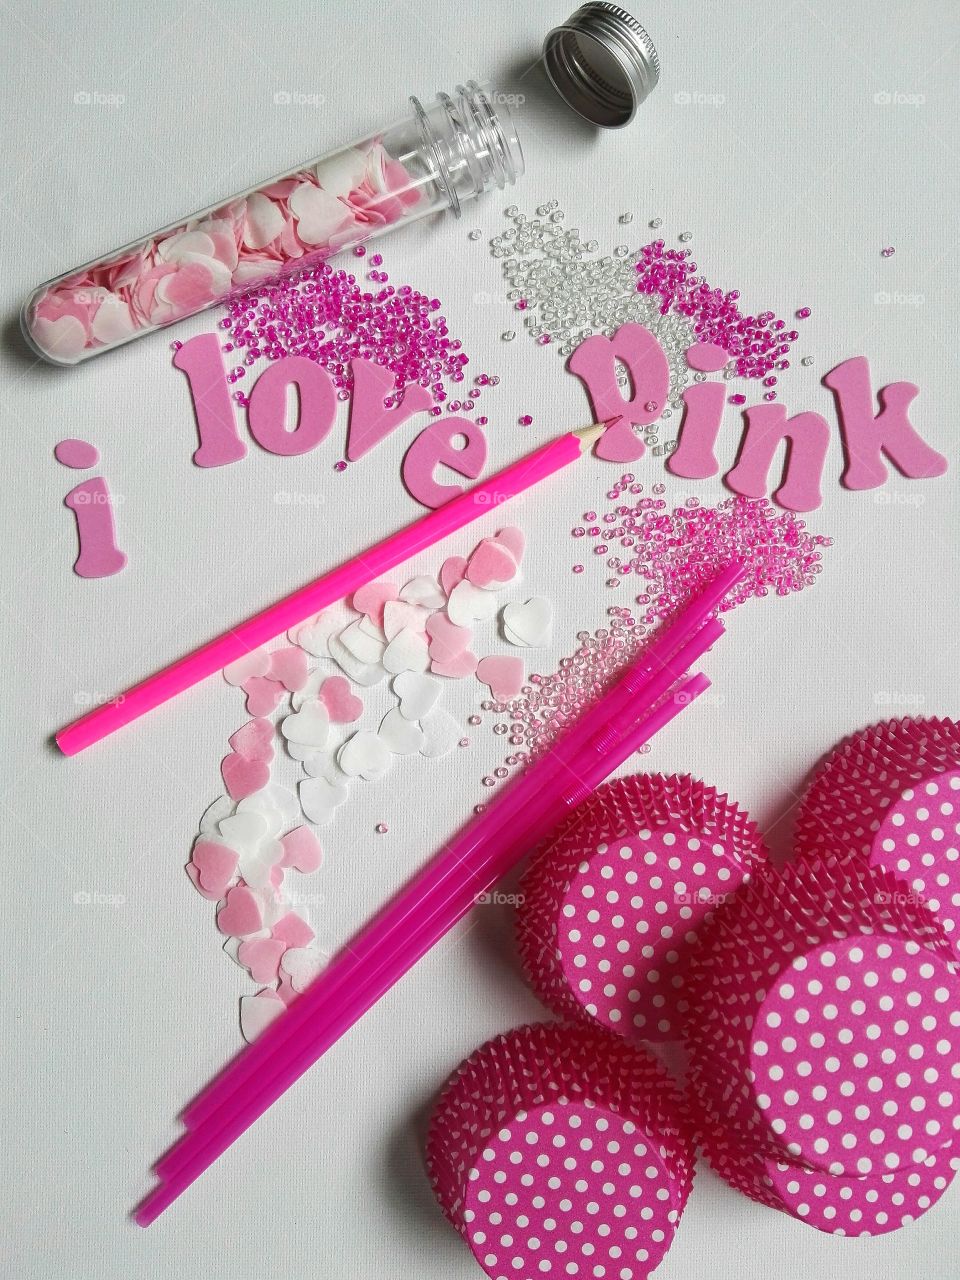 Love text made with pink paper